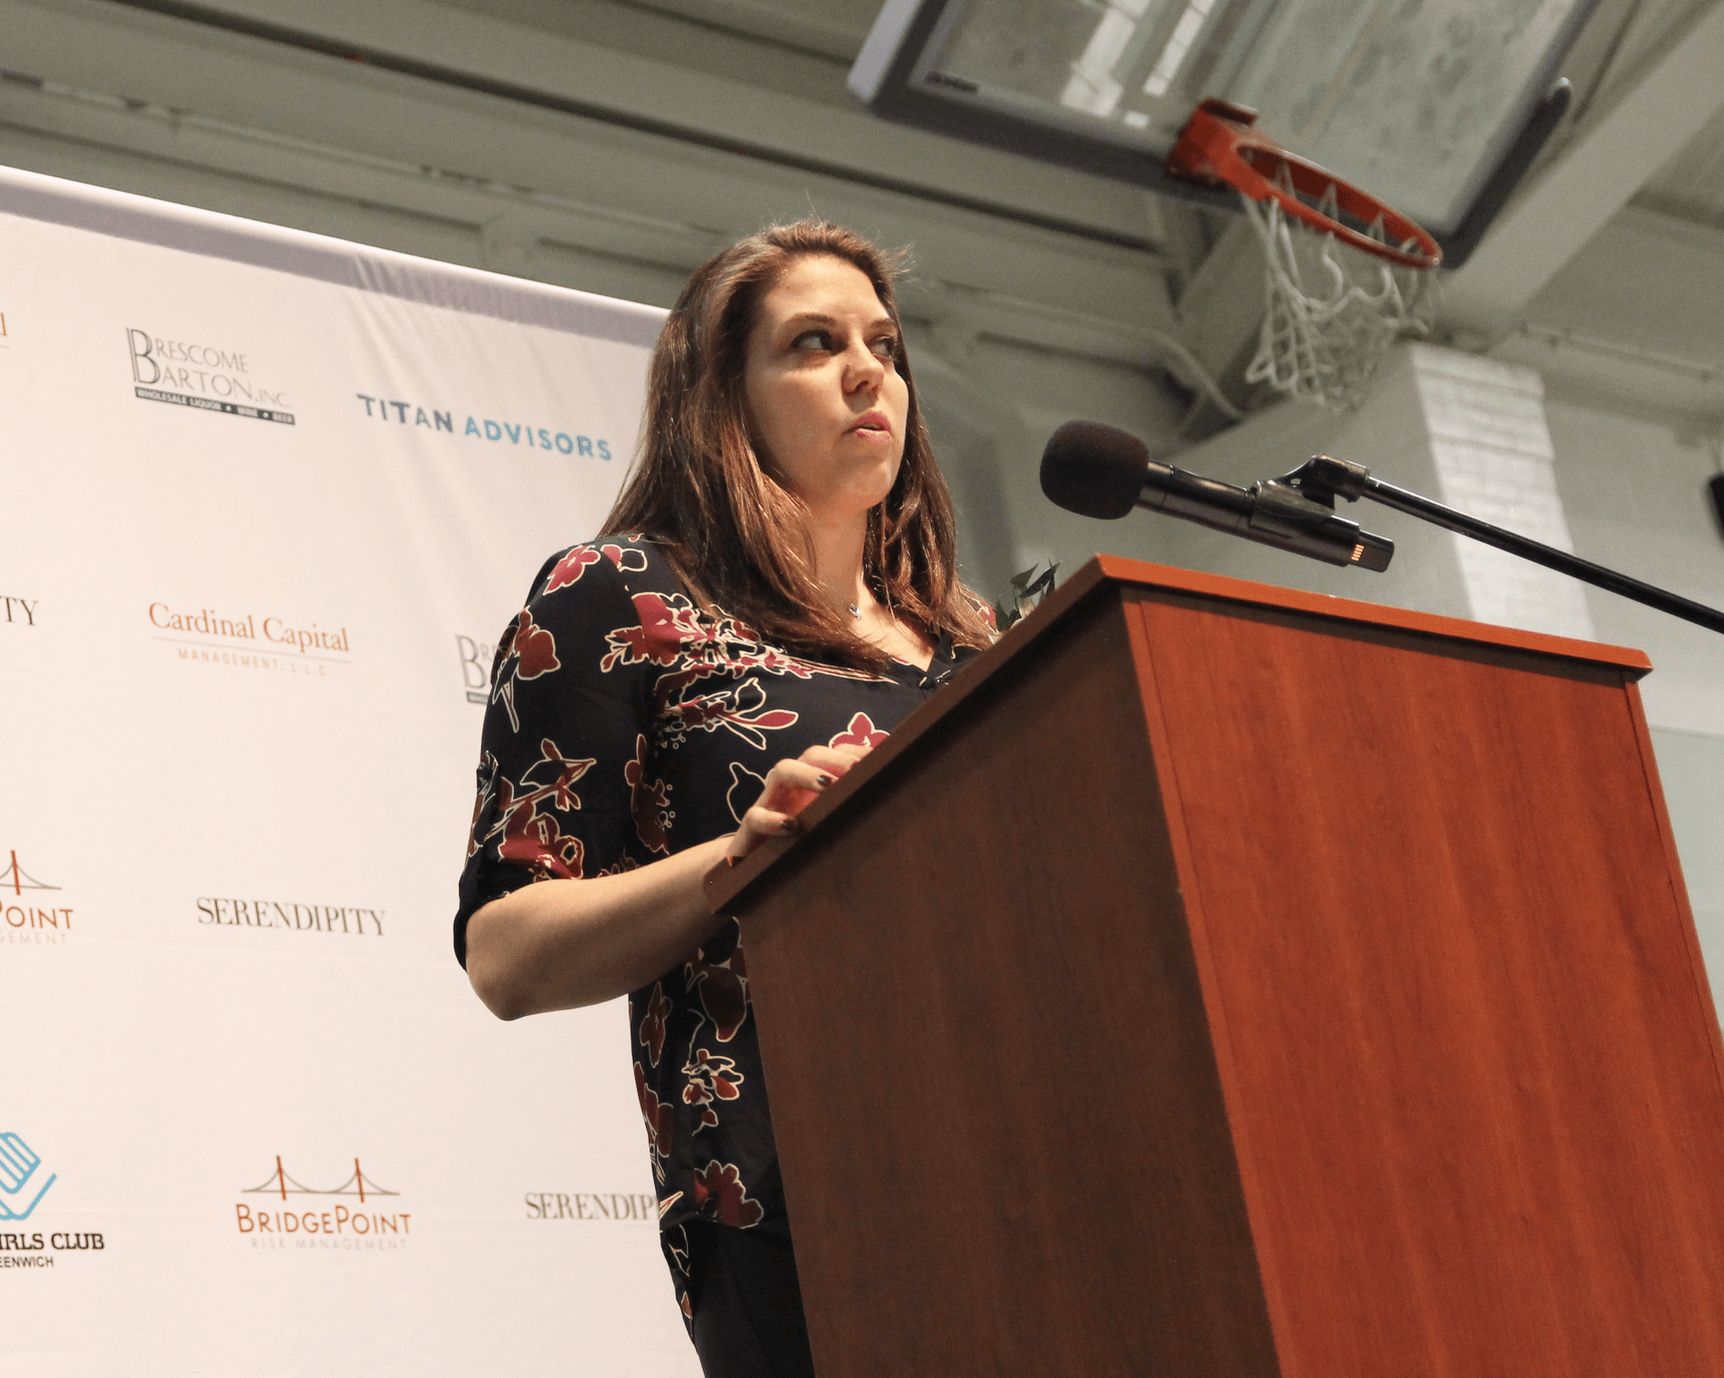 Ashley Culver shared the impact the Boys & Girls Club of Greenwich had on her growing up. Today she is an employee of the Club. Feb 7, 2019 Photo: Leslie Yager